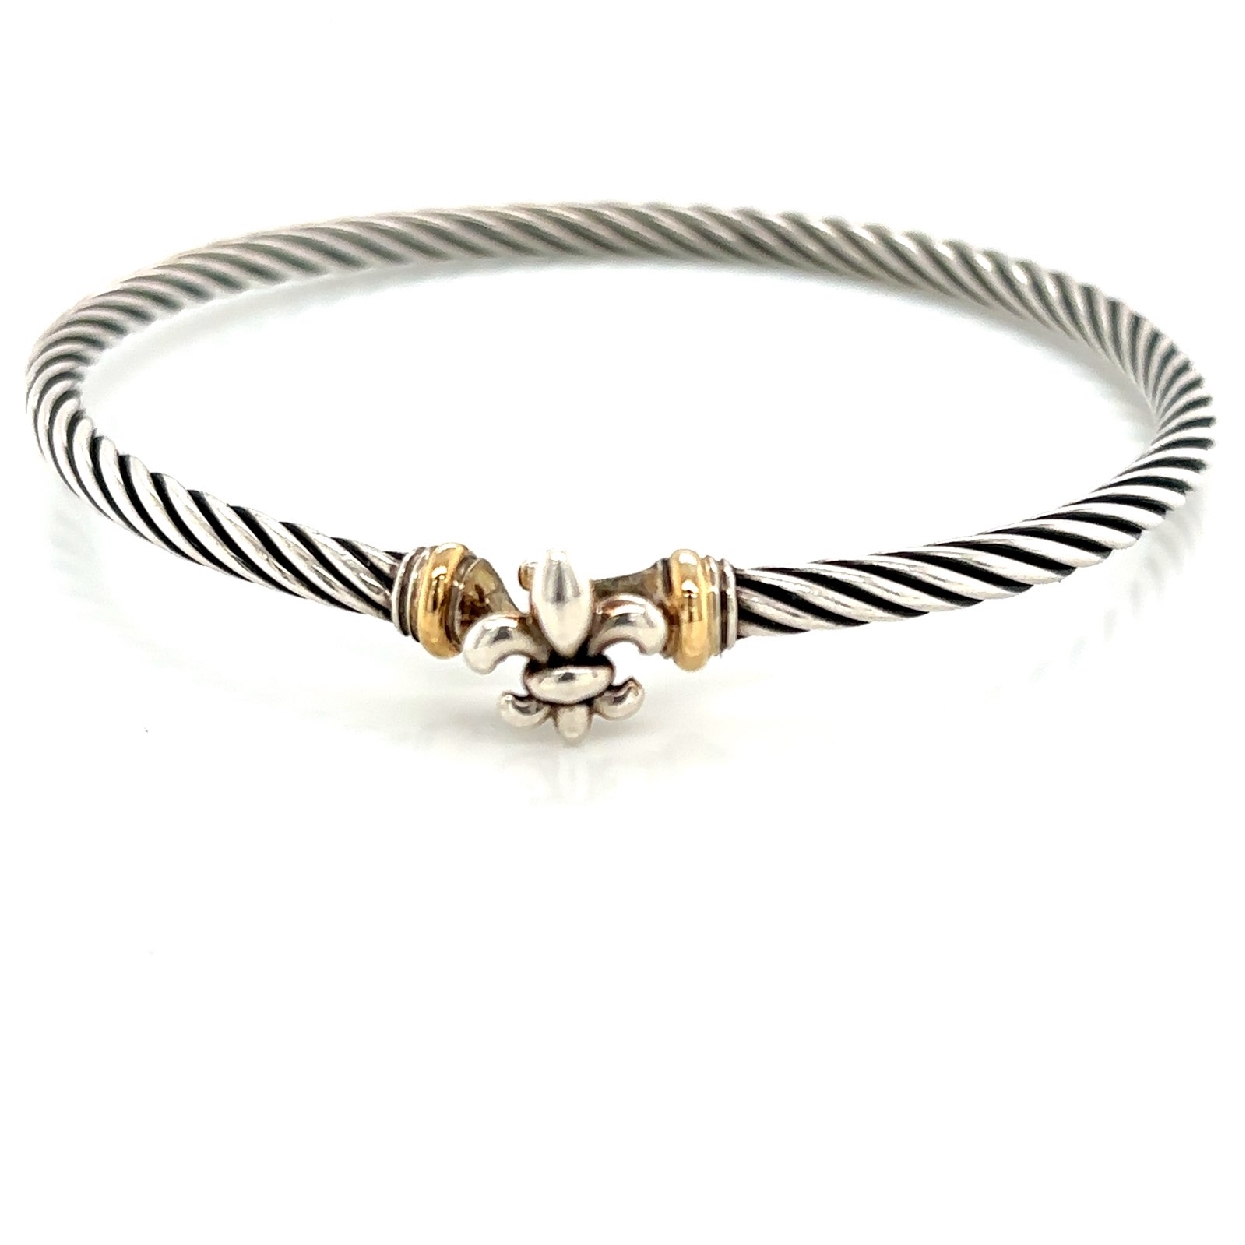 David Yurman 3mm Cable Fleur De Lis Bracelet in Sterling Silver and 18K Yellow Gold 

With Original Bag